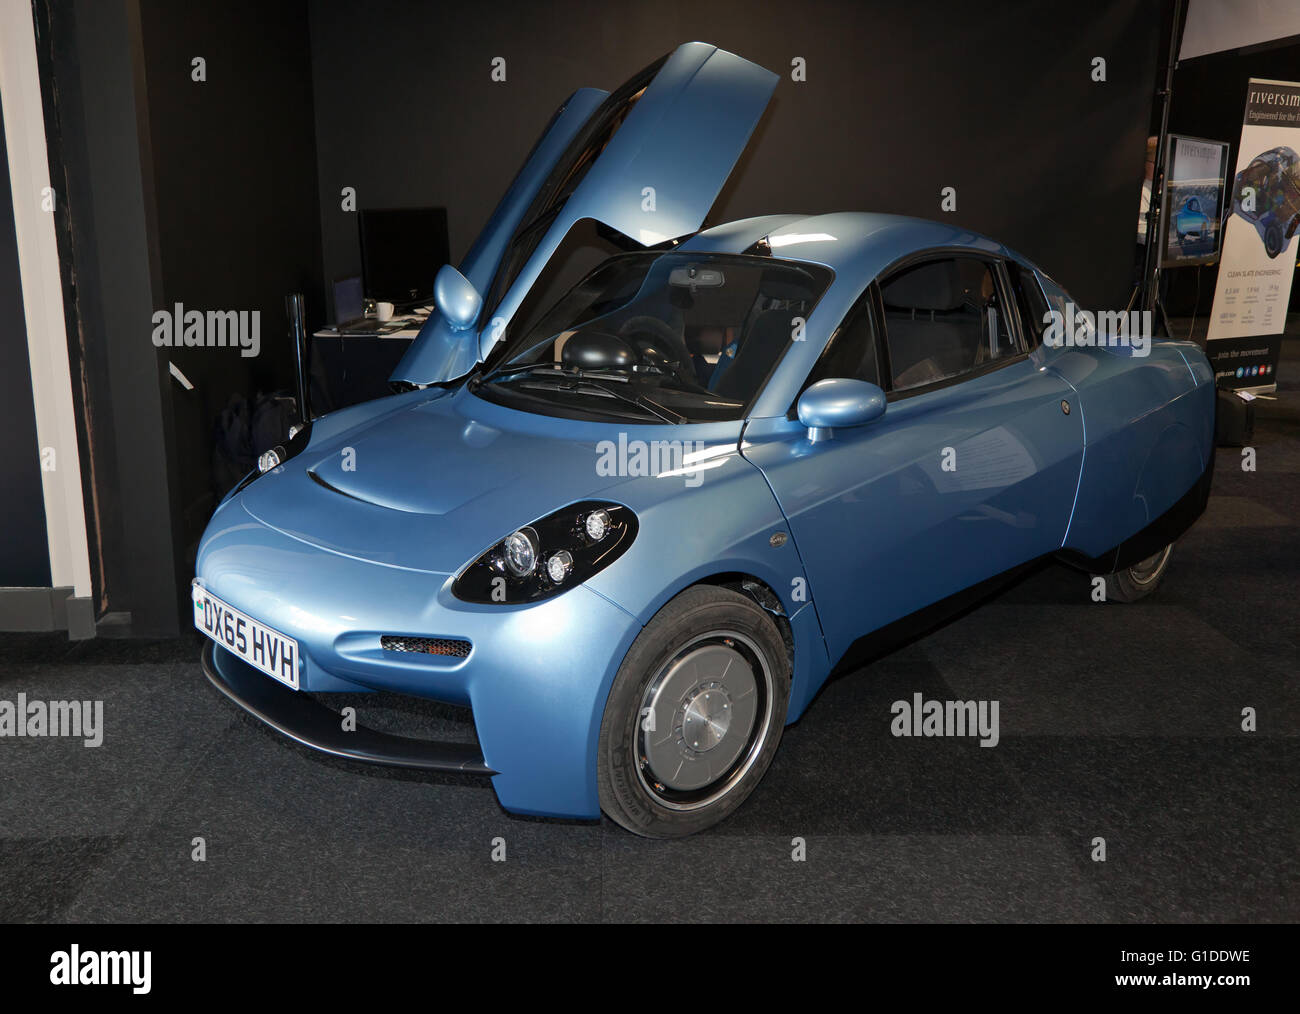 The River Simple RASA Prototype, a small hydrogen-powered fuel cell electric vehicle, on display at the London Motor Show 2016 Stock Photo